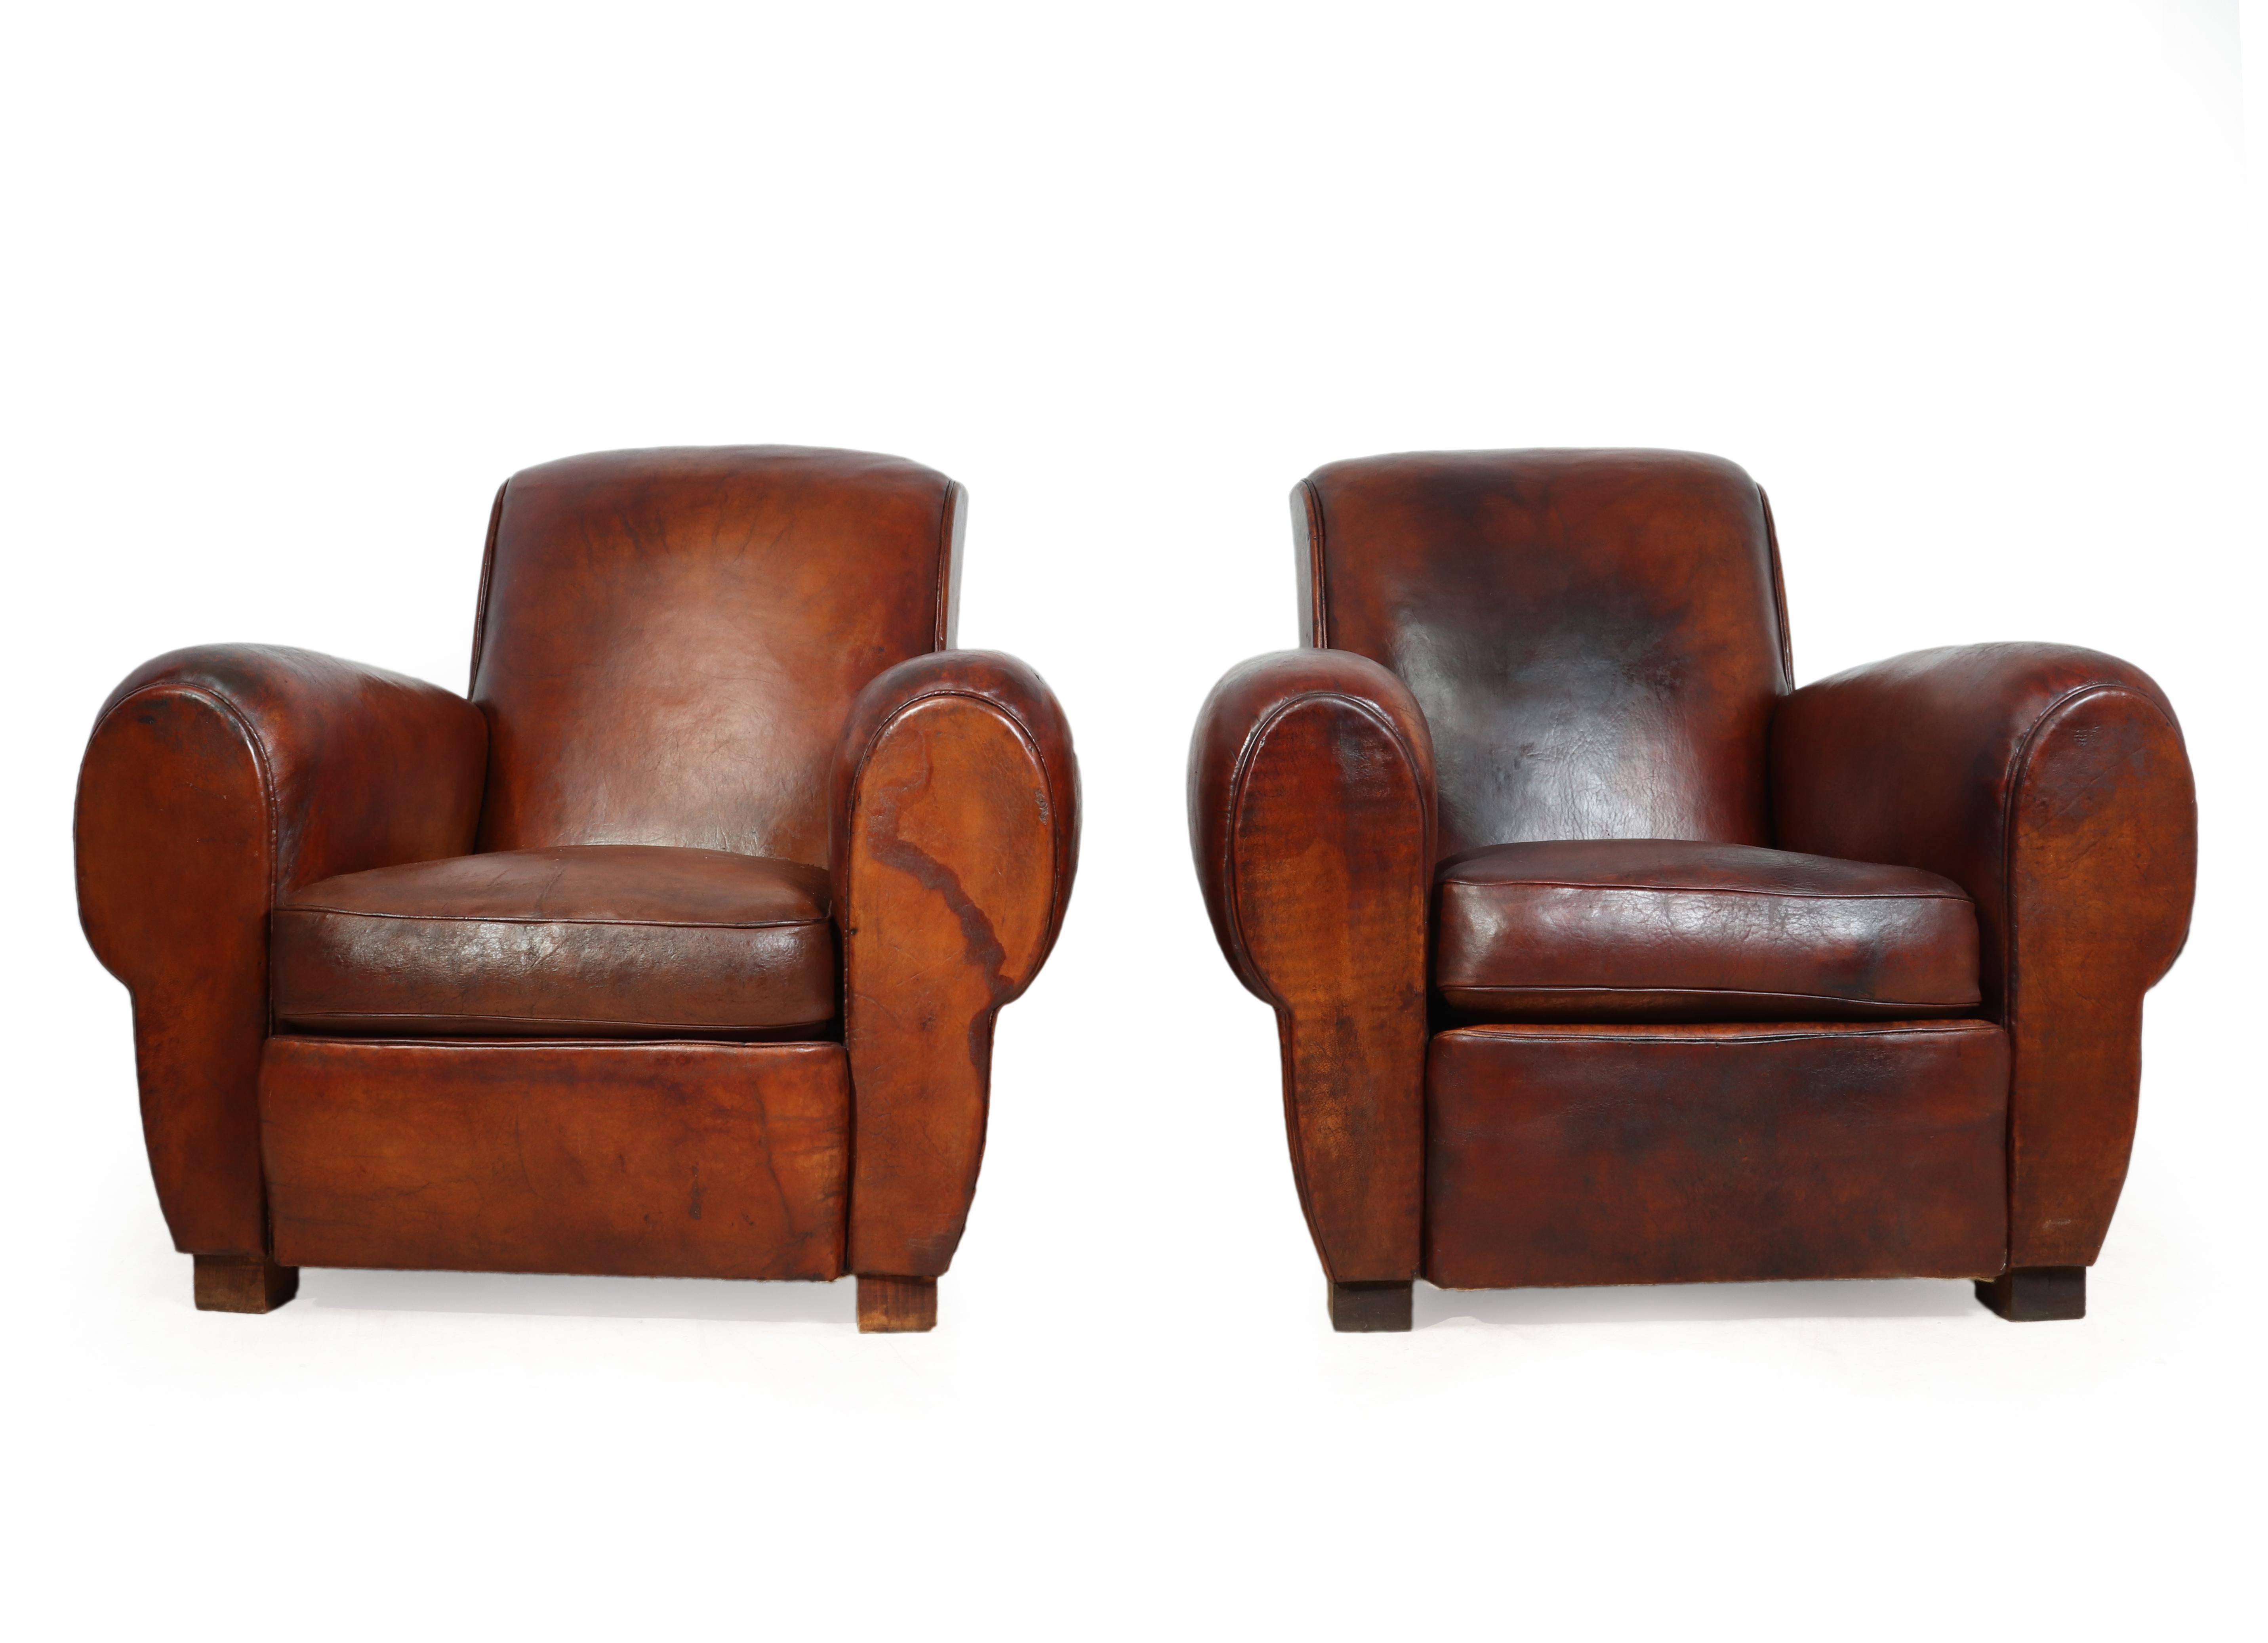 Pair of antique French leather club chairs
This pair of leather club chairs were produced in France in the early 1940s, the leather has been conditioned, polished and is soft and strong, they have fully sprung seat back and arms with a solid wooden